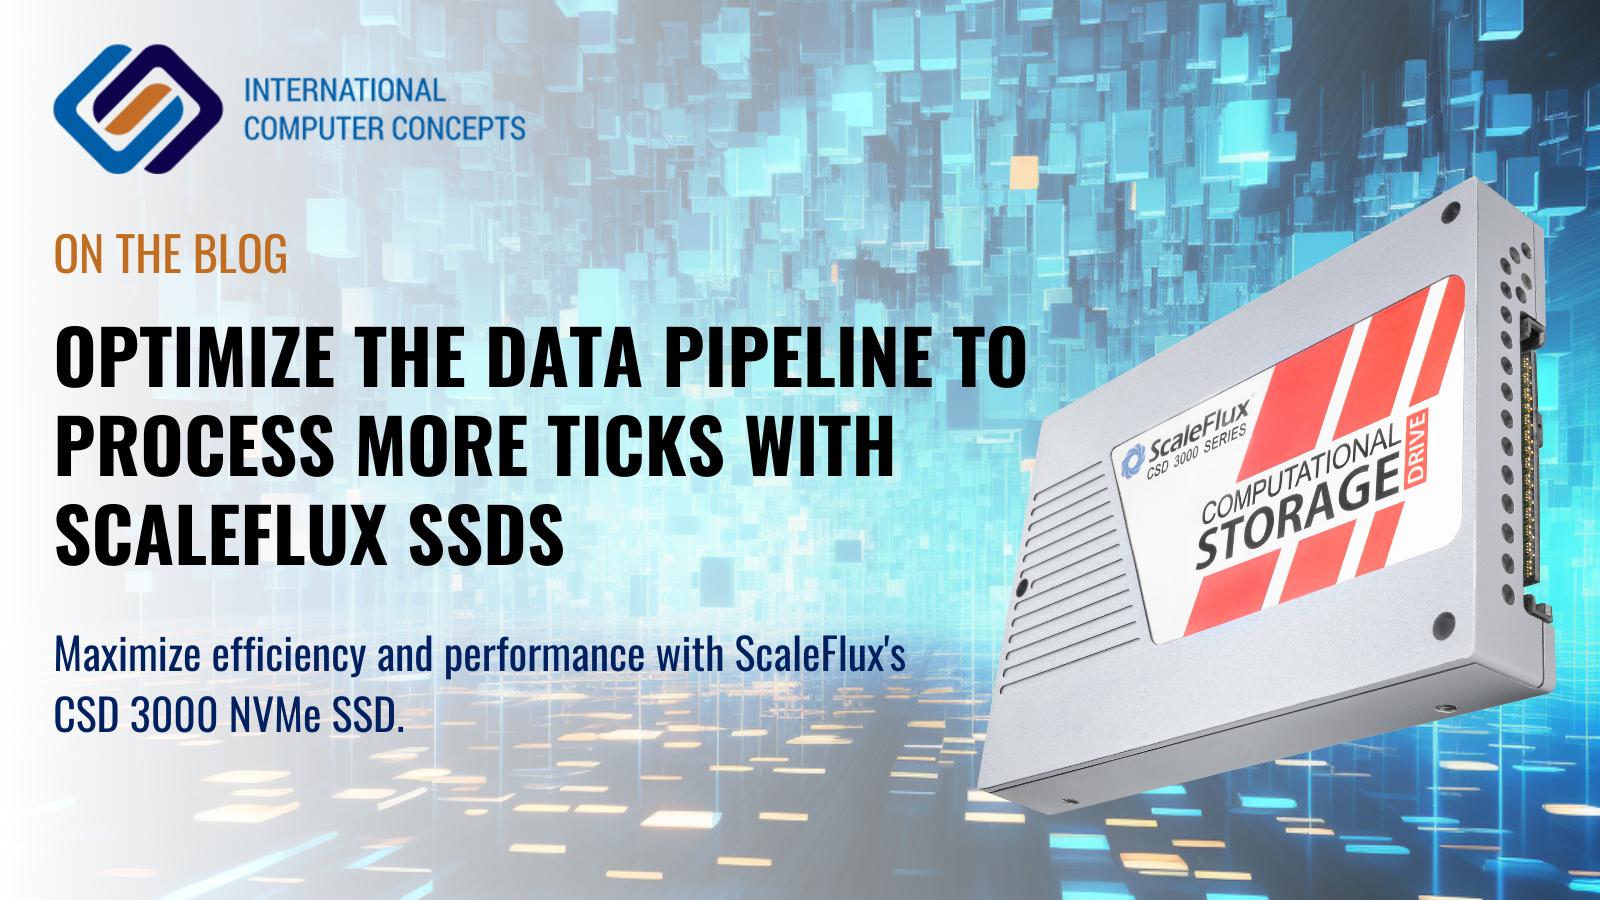 Optimize the Data Pipeline to Process More Ticks with ScaleFlux SSDs